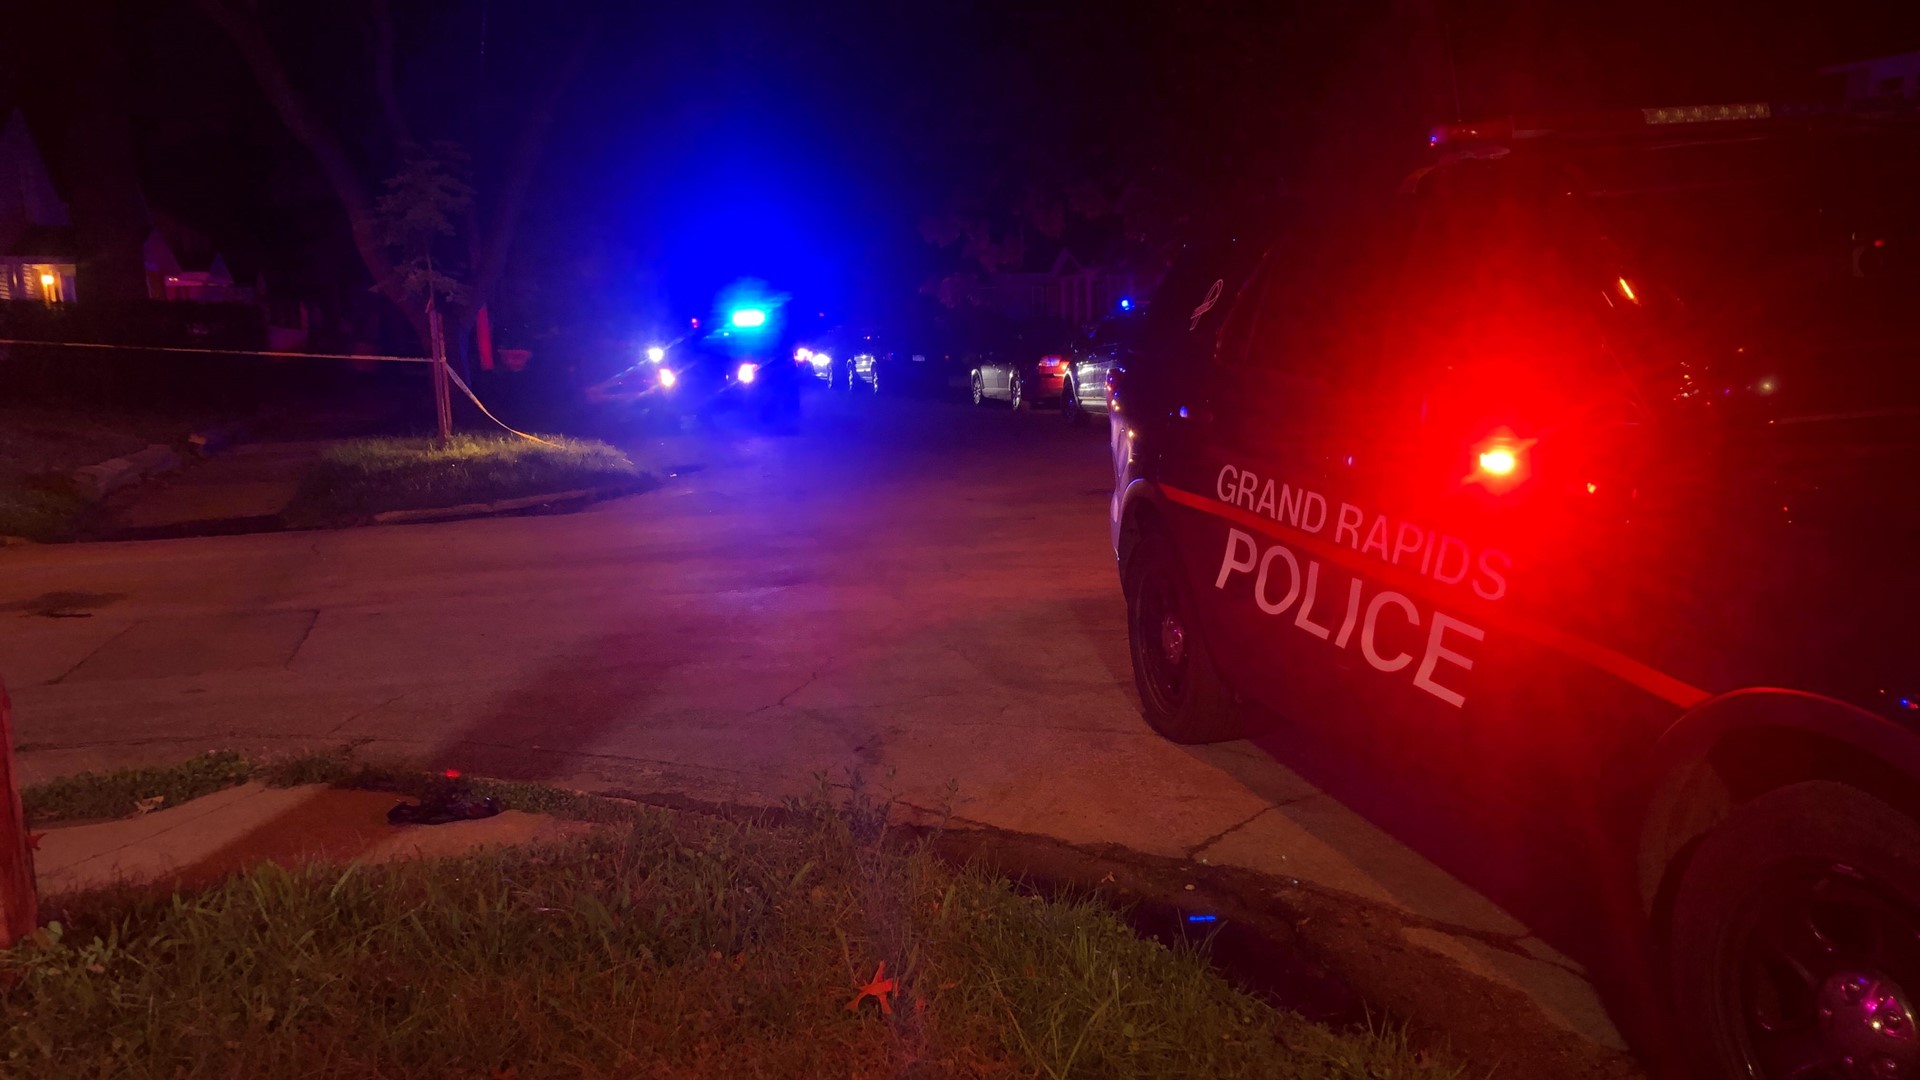 Police in Grand Rapids are searching for four suspects in an overnight shooting on the southwest side that left three people injured.